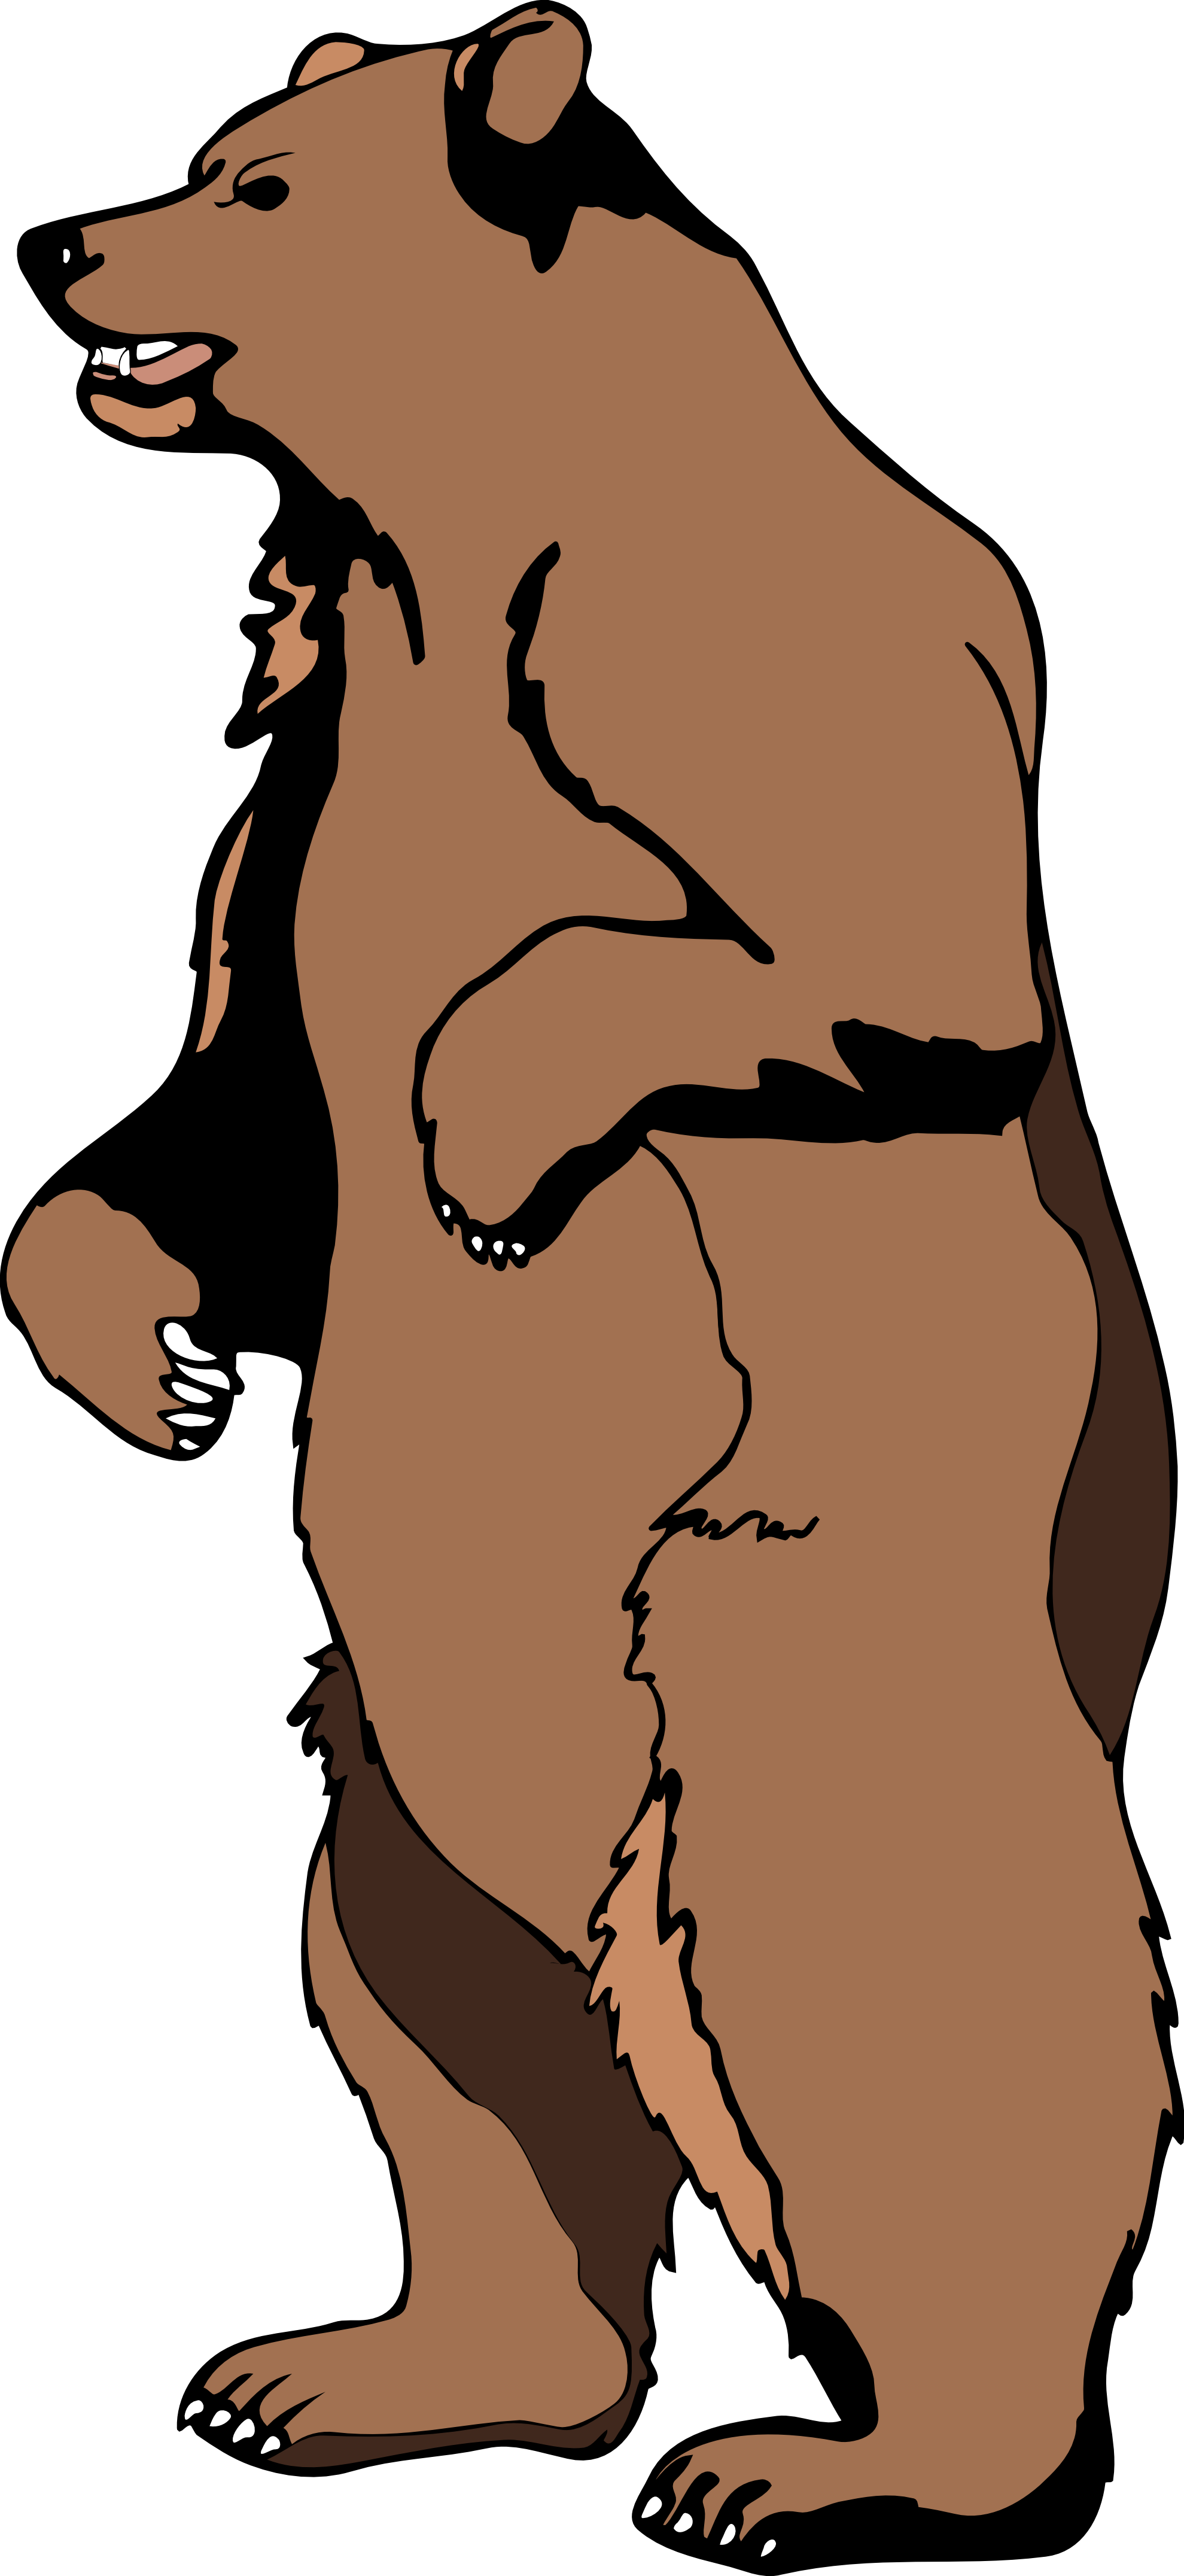 Grizzly bear clipart clipart images gallery for free.